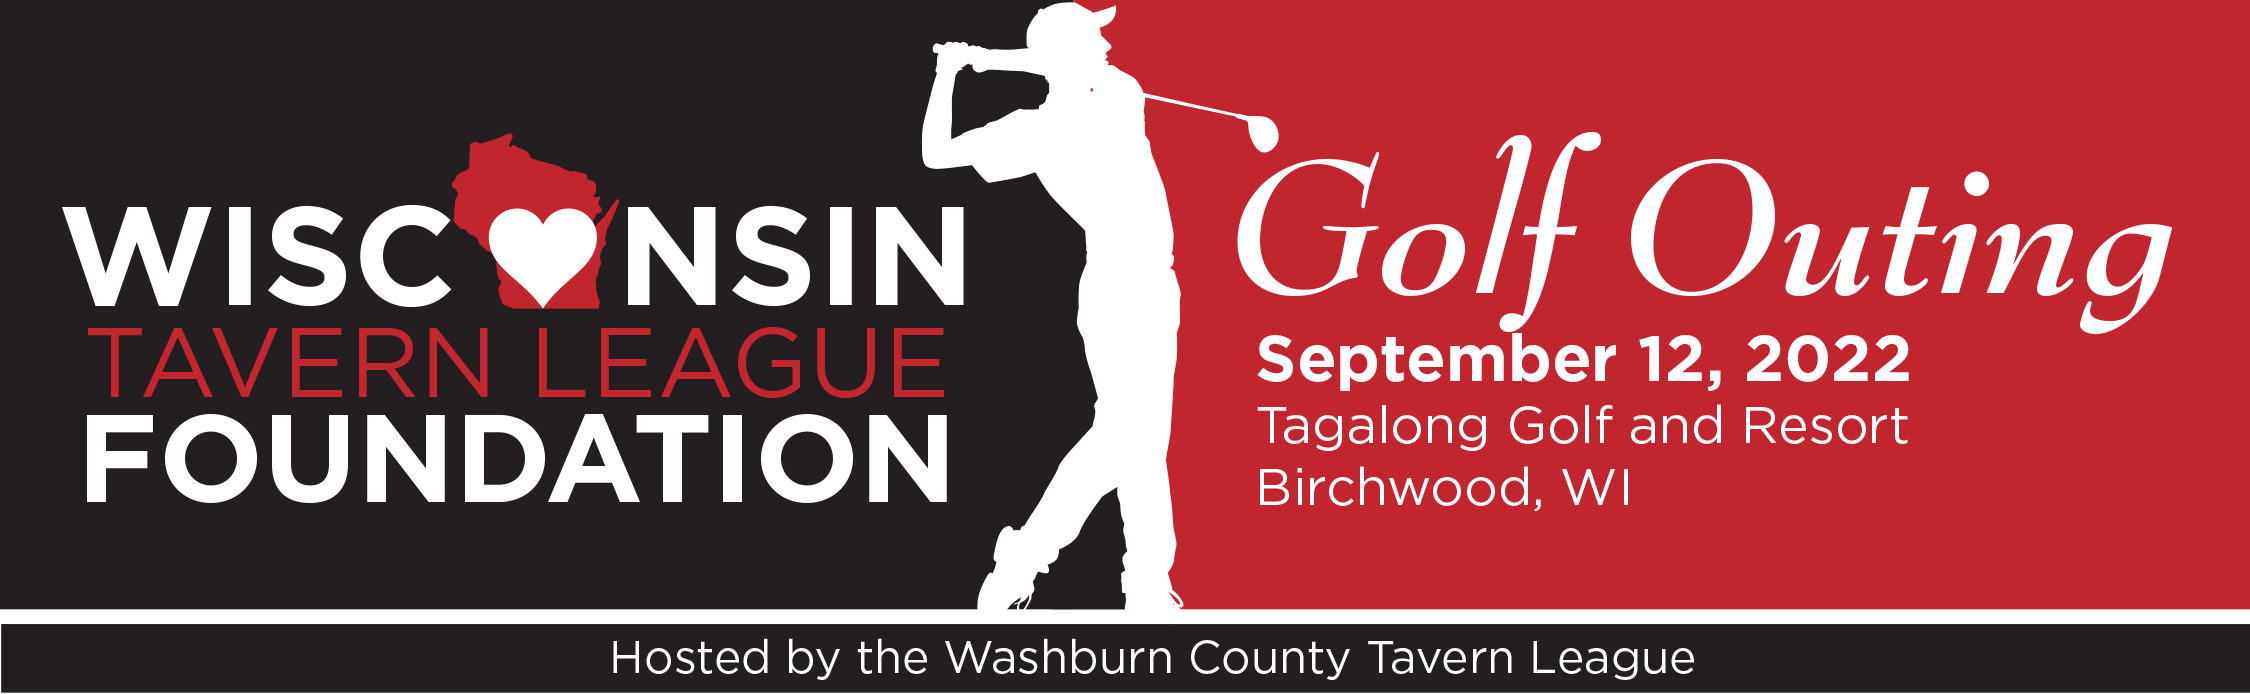 24th Annual Wisconsin Tavern League Foundation Golf Outing Event